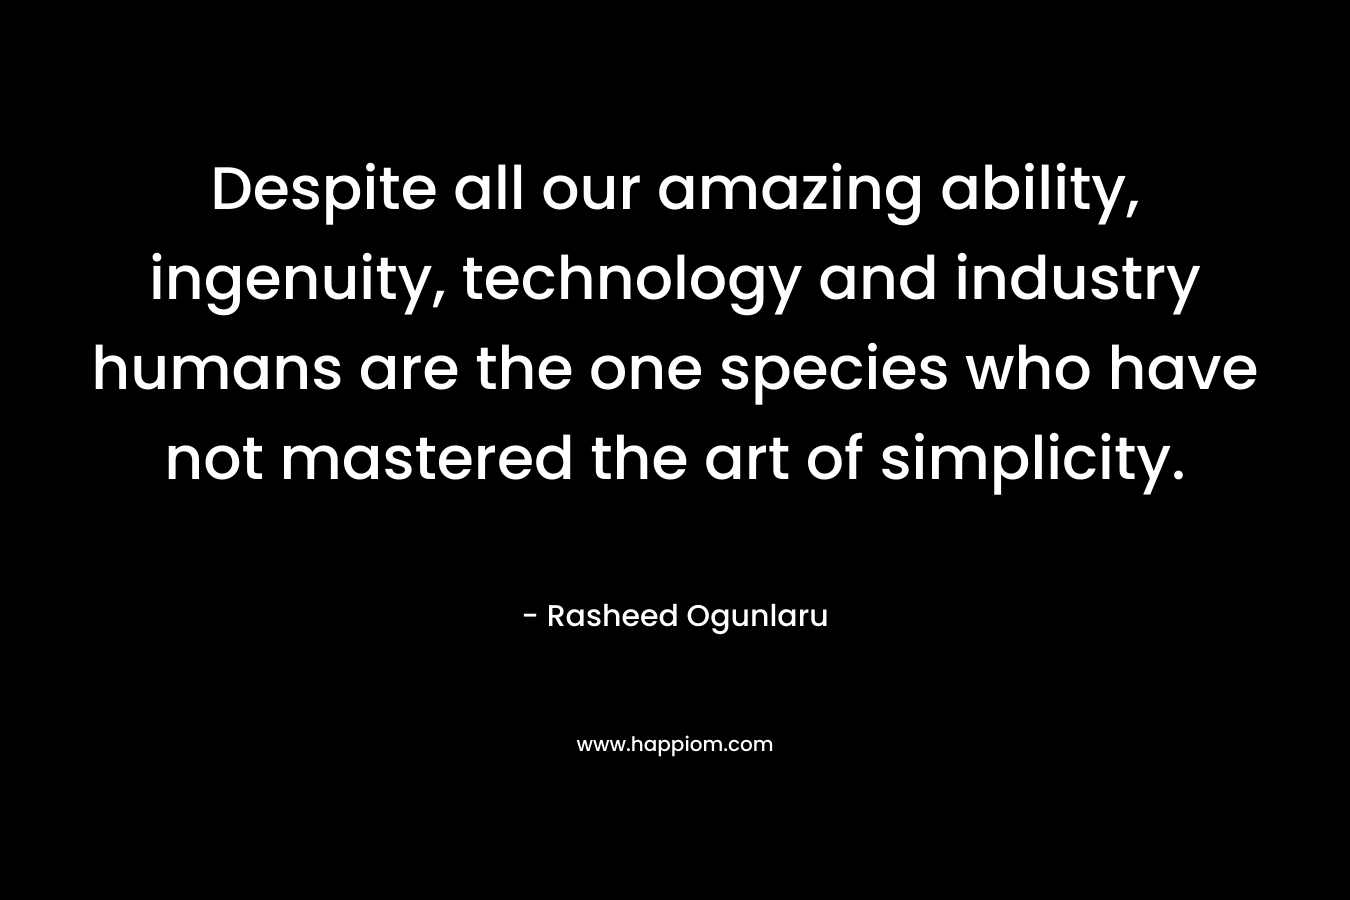 Despite all our amazing ability, ingenuity, technology and industry humans are the one species who have not mastered the art of simplicity. – Rasheed Ogunlaru